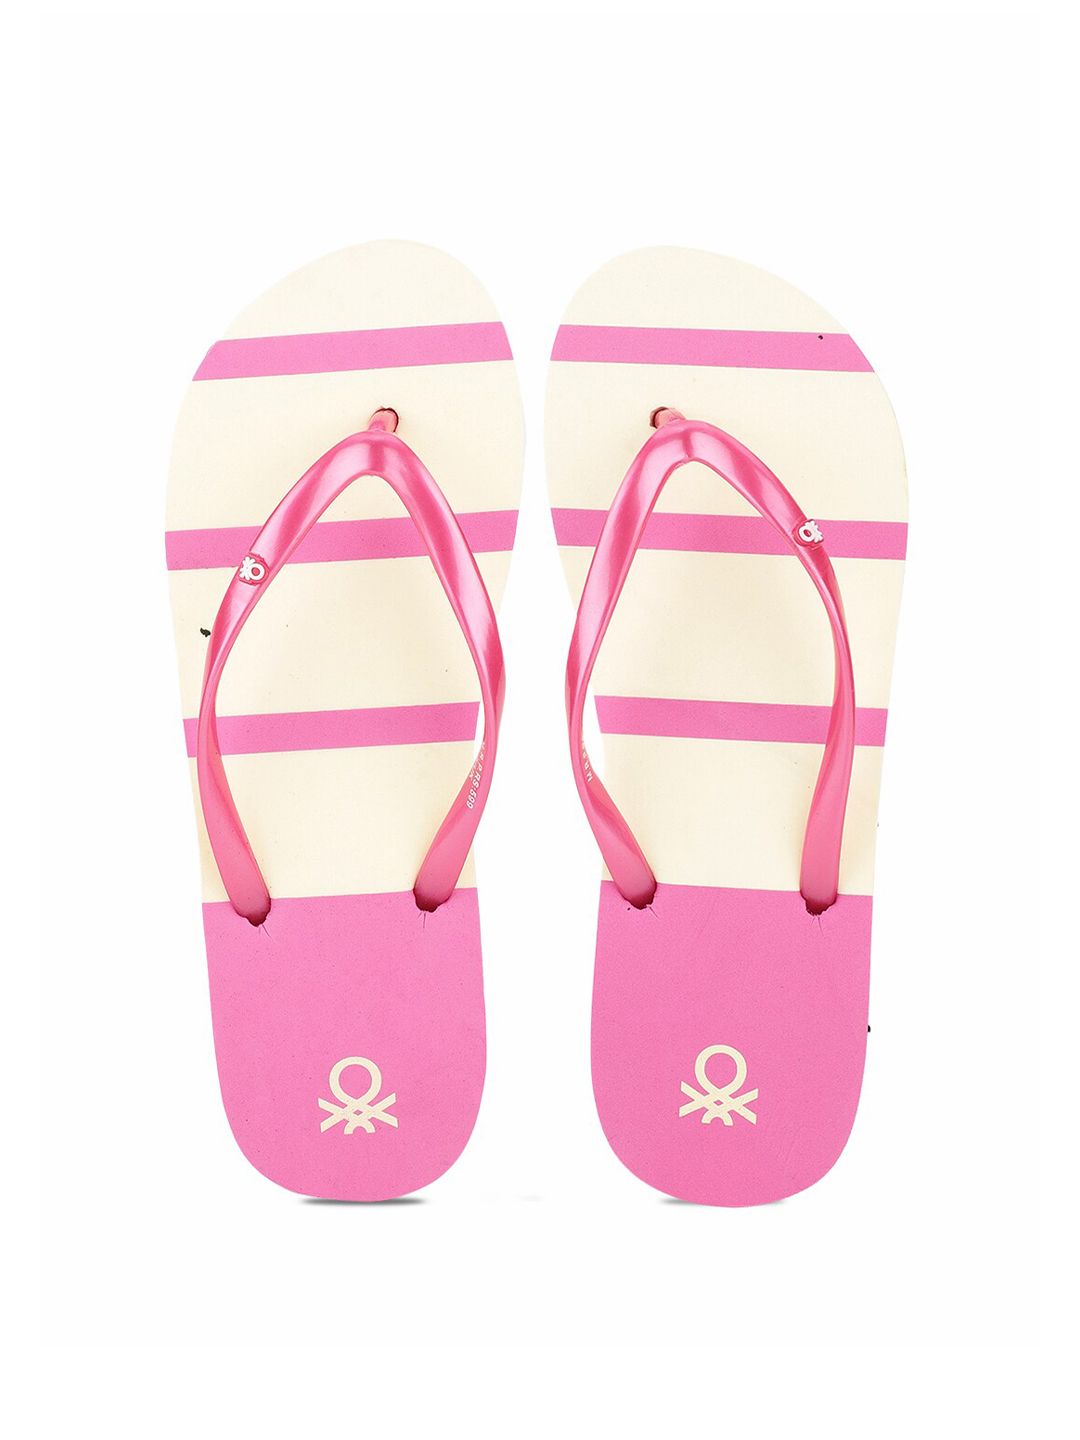 United Colors of Benetton Women Pink & Cream-Coloured Striped Rubber Thong Flip-Flops Price in India